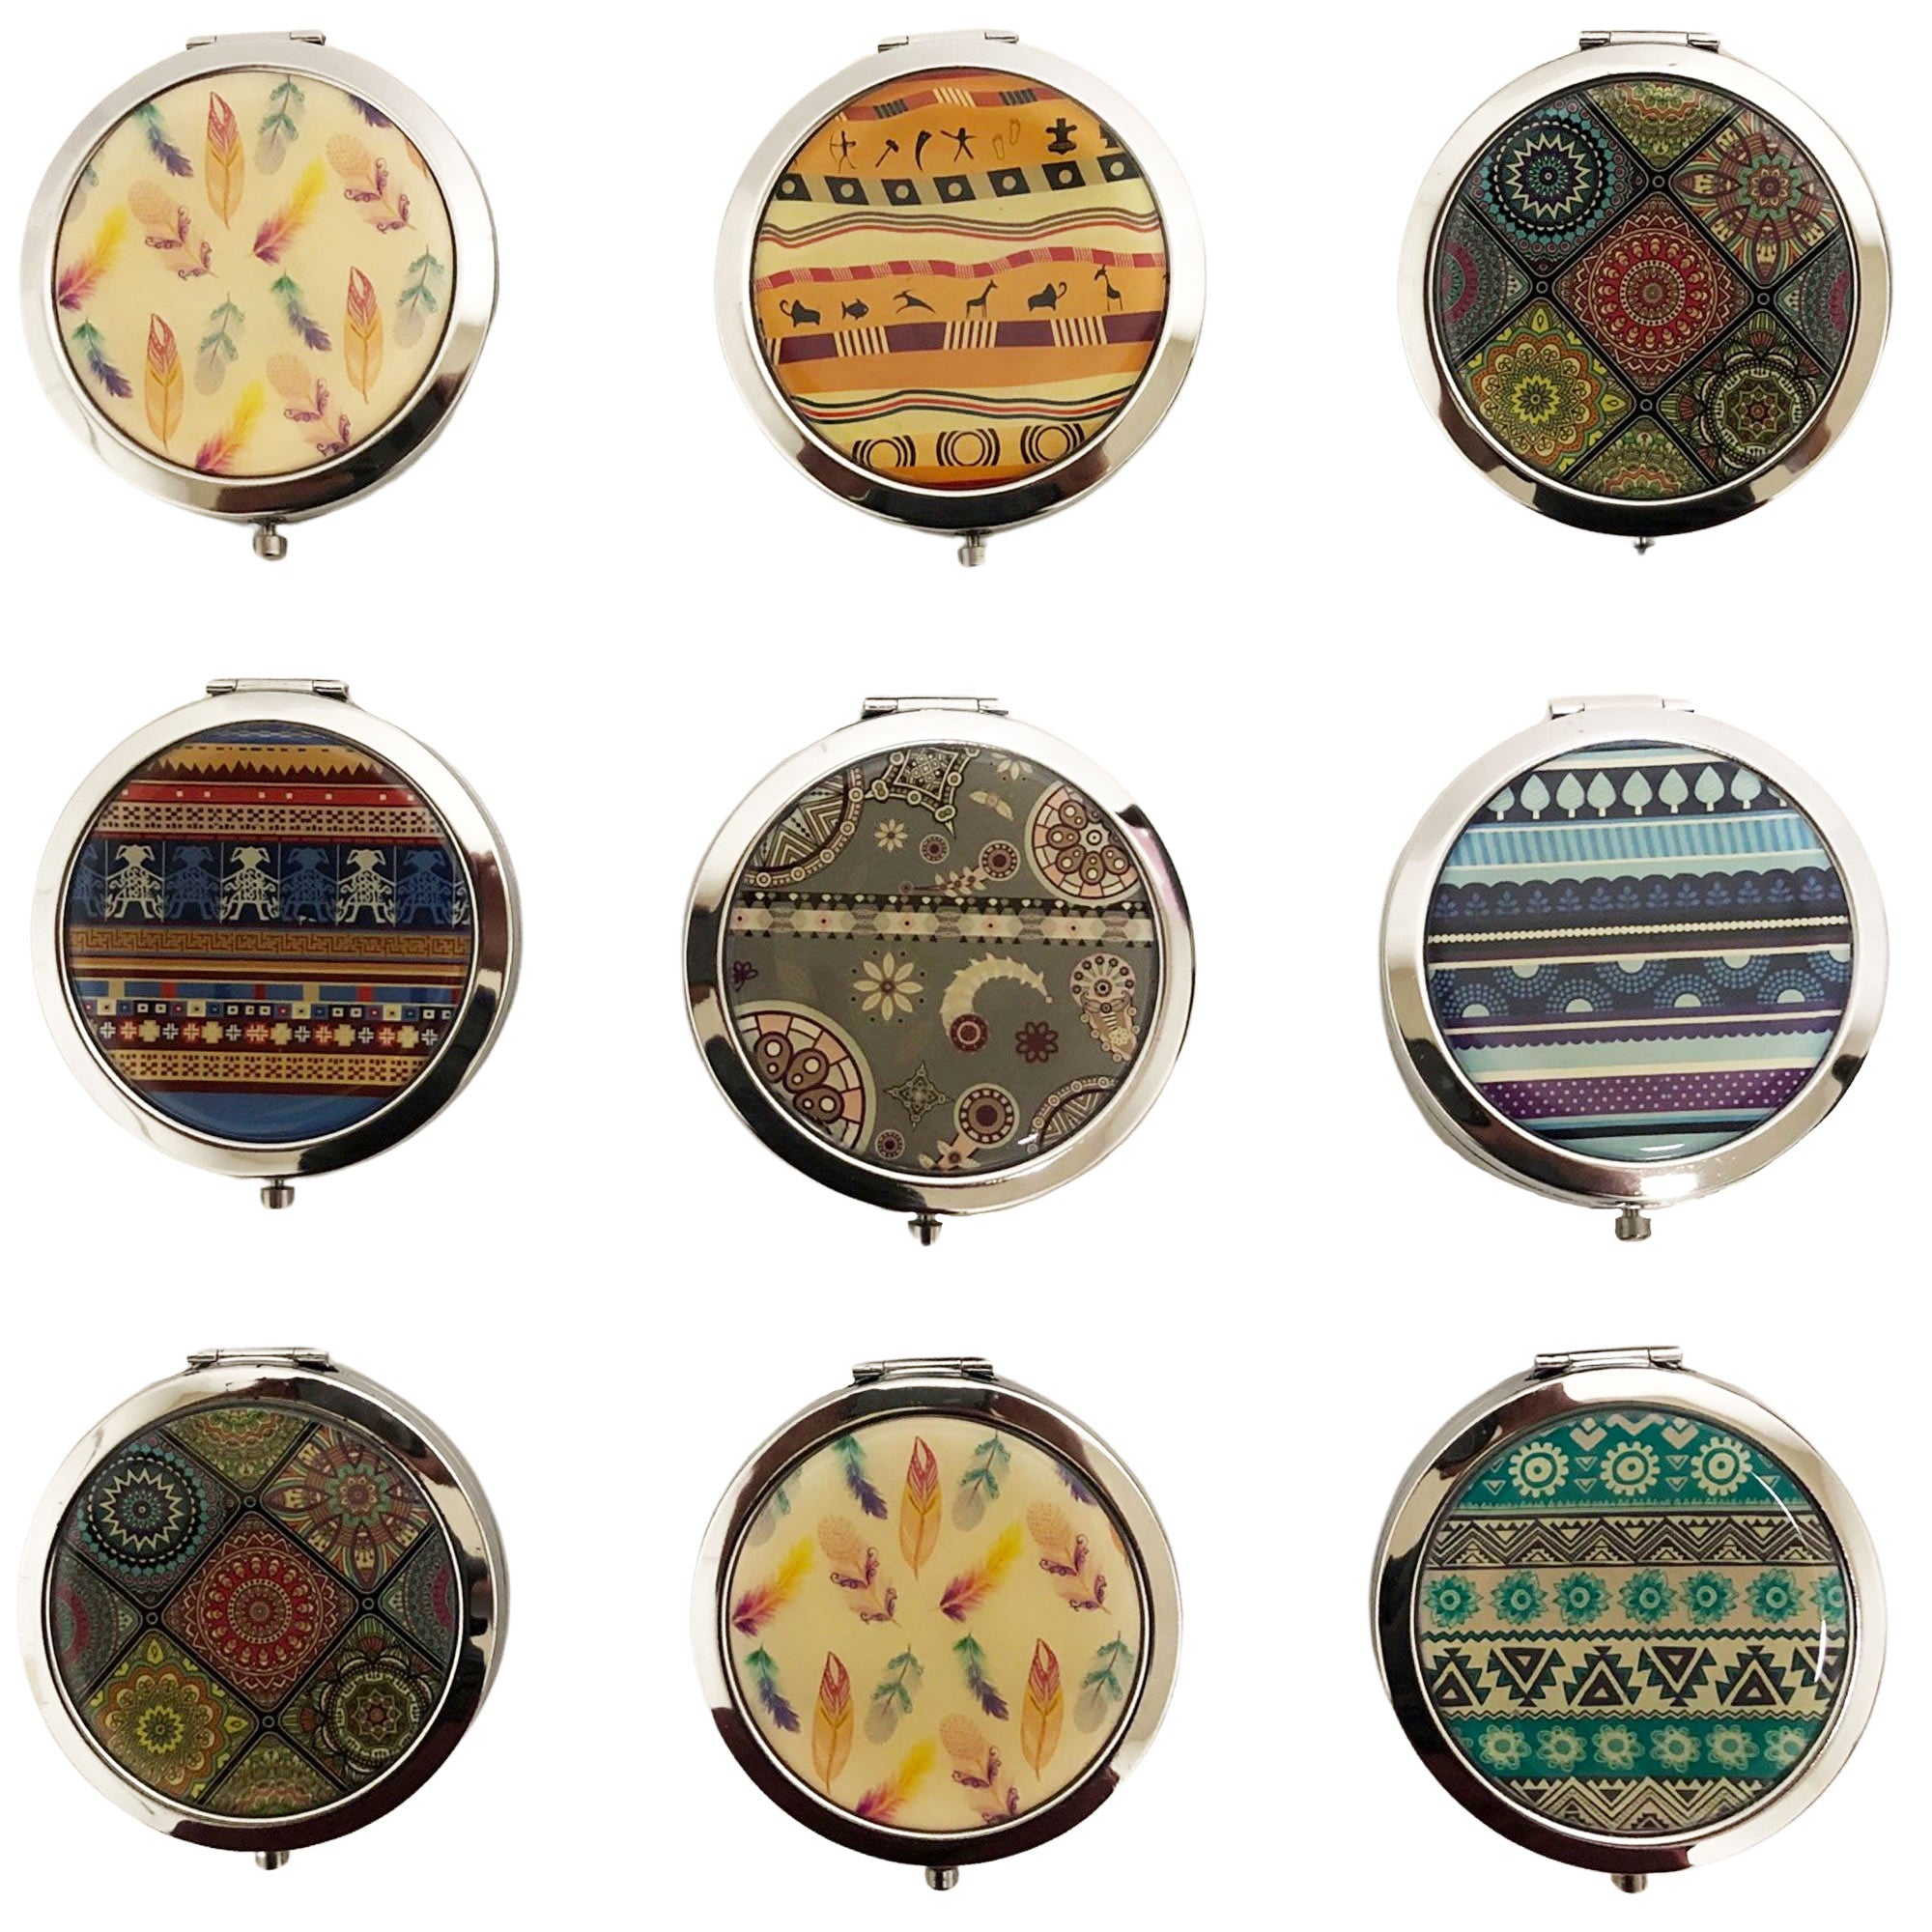 CLEARANCE COSMETIC MIRRORS TRIBAL PRINTS (CASE OF 60 - $1.00 / PIECE)  Wholesale Round Cosmetic Mirrors in Tribal Prints SKU: 801-TRIBAL-60